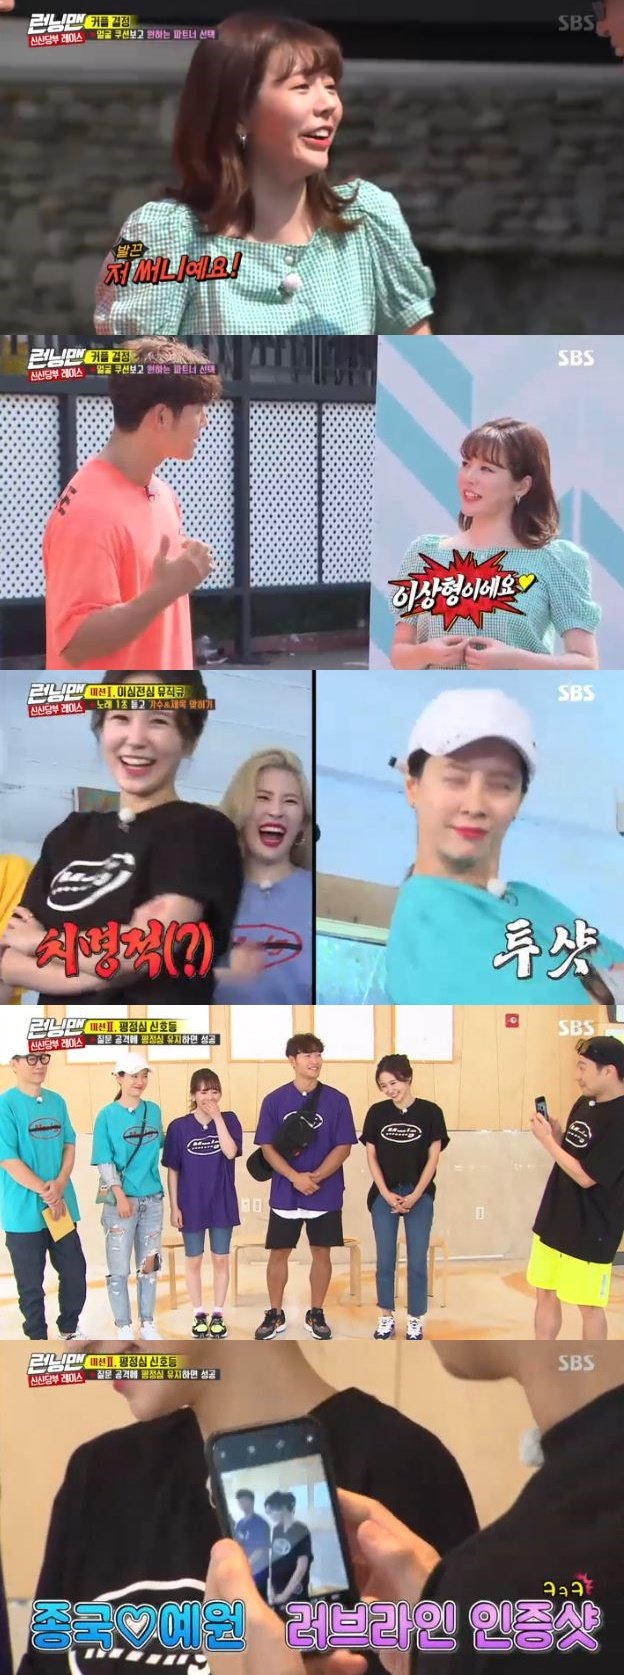 SBS entertainment program Running Man, which was broadcasted on the afternoon of the afternoon, appeared as a guest by Girls Generation Sunny, singer Sunmi, actor Kim Ye-won and announcer Jang Ye-won.Members and guests received a mission to find the god of light, the god of darkness, and the prophet hidden between them.Sunny teamed up with Kim Jong-kook, Kim Ye-won with Yoo Jae-Suk, Jang Ye-won with Haha, Sunmi with Lee Kwang-soo, Song Ji-hyo with Ji Seok-jin, and Jeon So-min with Yang Se-hyung.Sunny, in a daze to team up with Kim Jong-kook, declared that Kim Jong-kook is the ideal type.Because Jang Ye-won has been in the race late for Kim Jong-kook.Kim Jong-kook laughed at the appearance of Sunny, who was pushed by the back, saying, How long have you met me, but suddenly it is my ideal type?Sunny also grabbed Running Man in a charm parade.One word that shouted Ideal toward Kim Jong-kook became a buzzword among female cast members. Even Song Ji-hyo shouted My Ideal.On the other hand, the entertainment beginner Jang Ye-won announcer showed a charm of reversal: he was quickly ripped off by a name tag, standing between Sunny and Song Ji-hyo with a spleen look.It was criticized by members as the first to be ripped off when it burns in the game, the game is not played at all; so is dance.Next to Sunny, who dances deftly, Jang Ye-won announcer showed off an unidentified dance.In the successful rating light traffic light mission, Kim Jong-kook and Love Line were formed by maintaining calmness in question attack.However, Kim Jong-kook regained his composure and laughed at the aggressive courtship of Chang announcer.